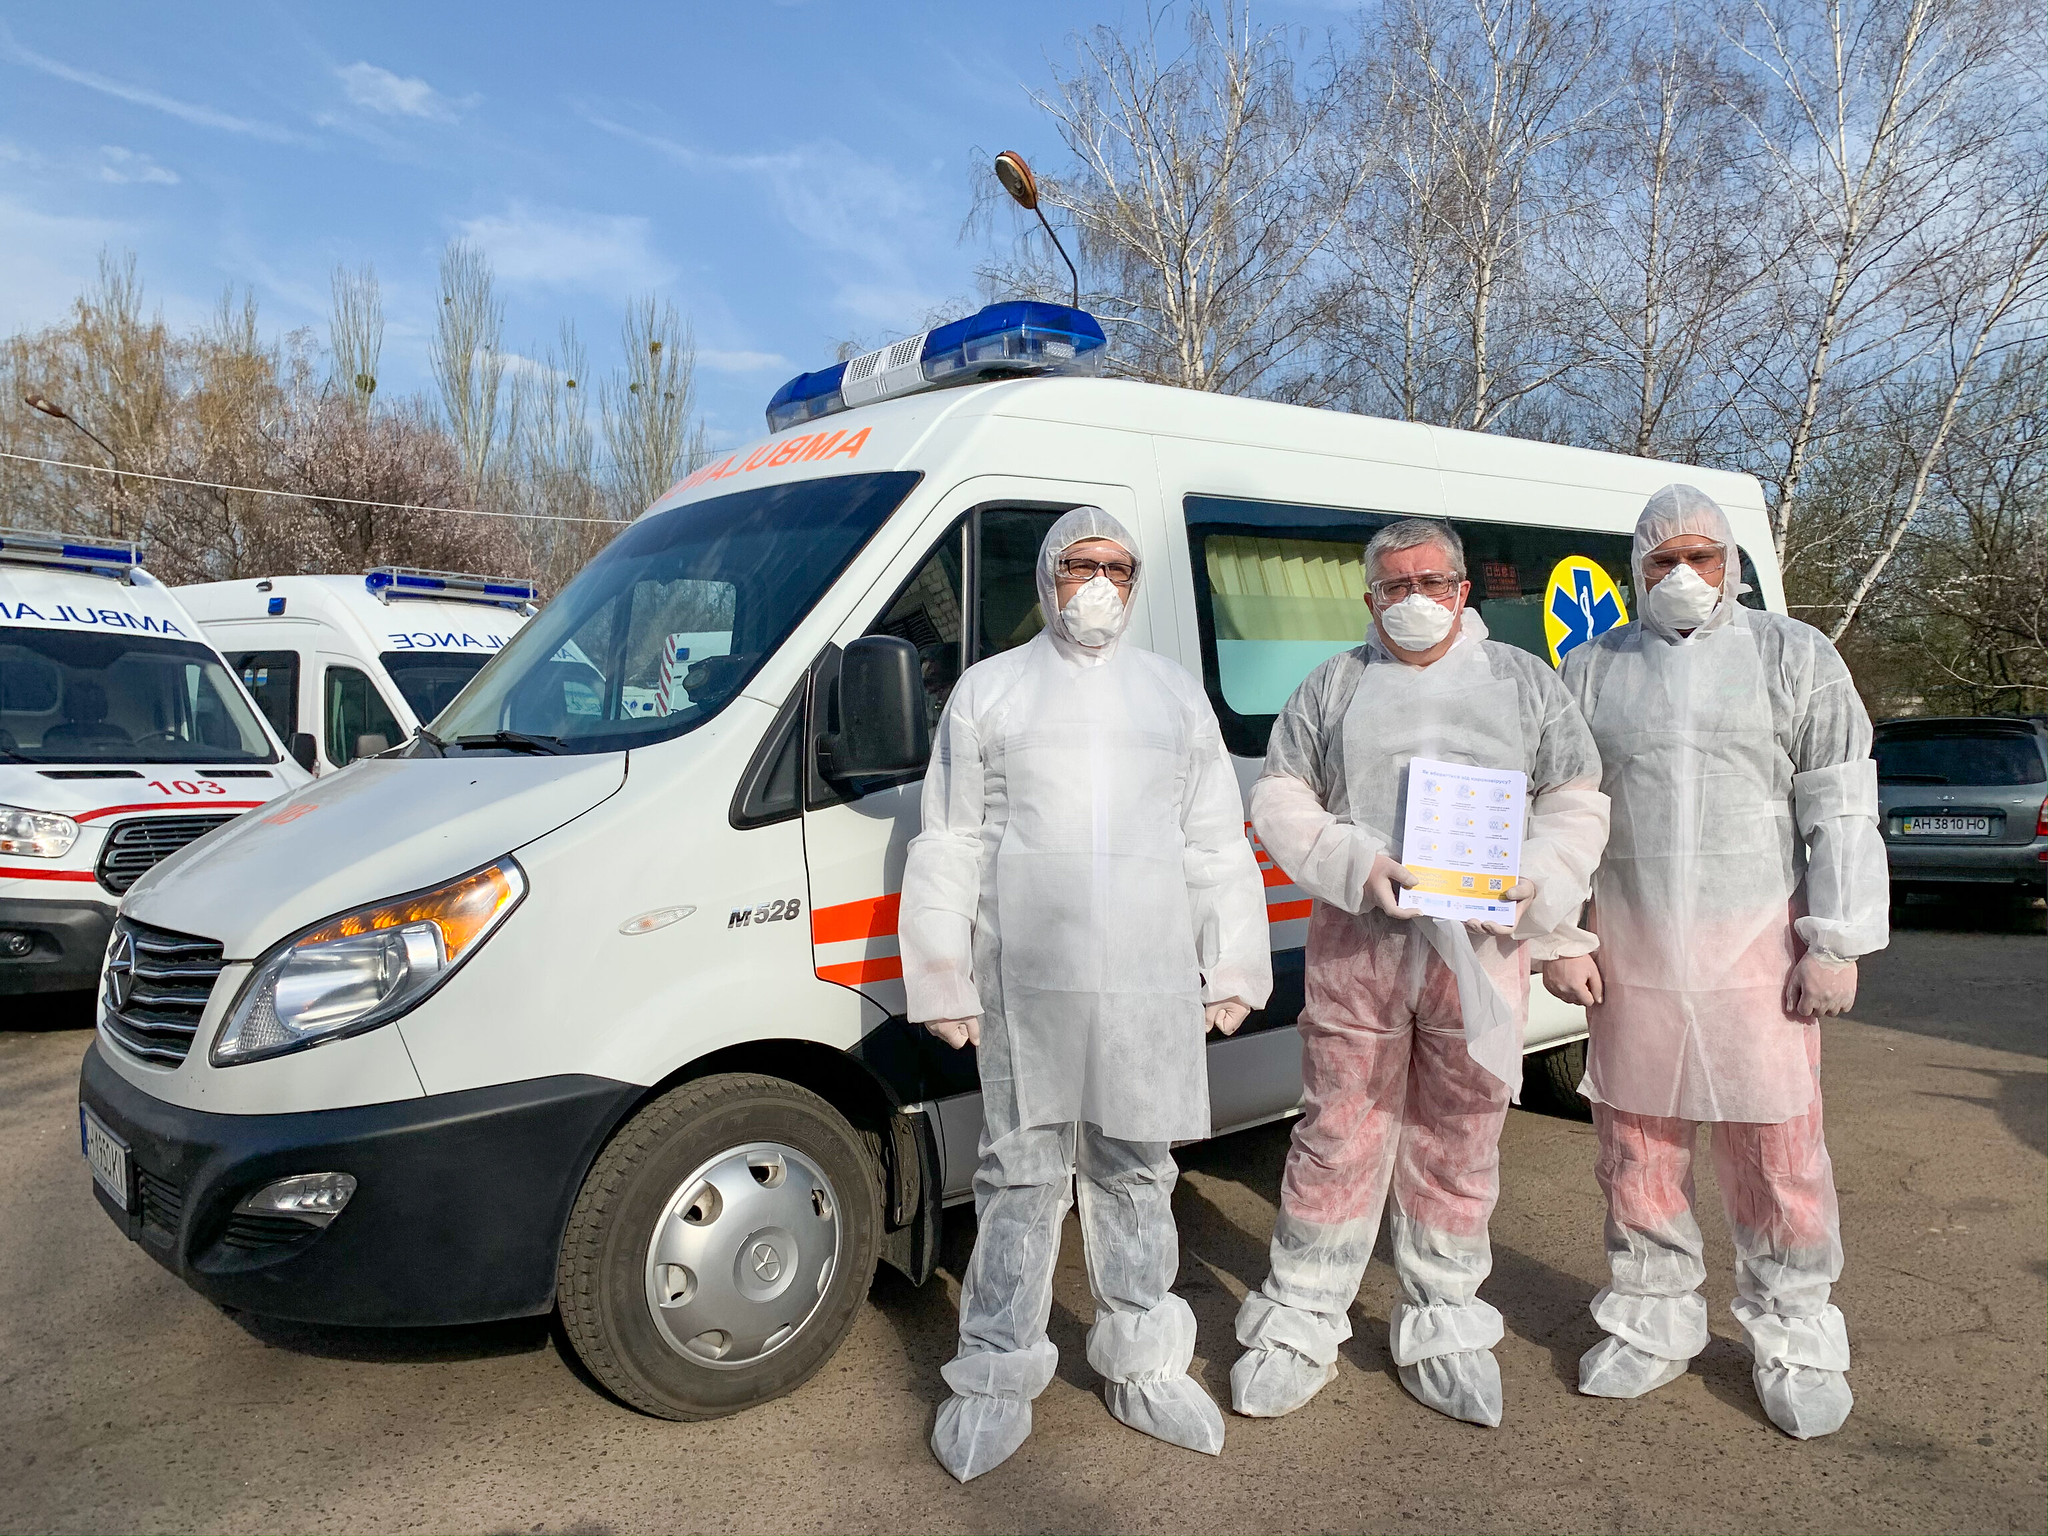 Medical workers in protective equipment stand in front of an ambulance.